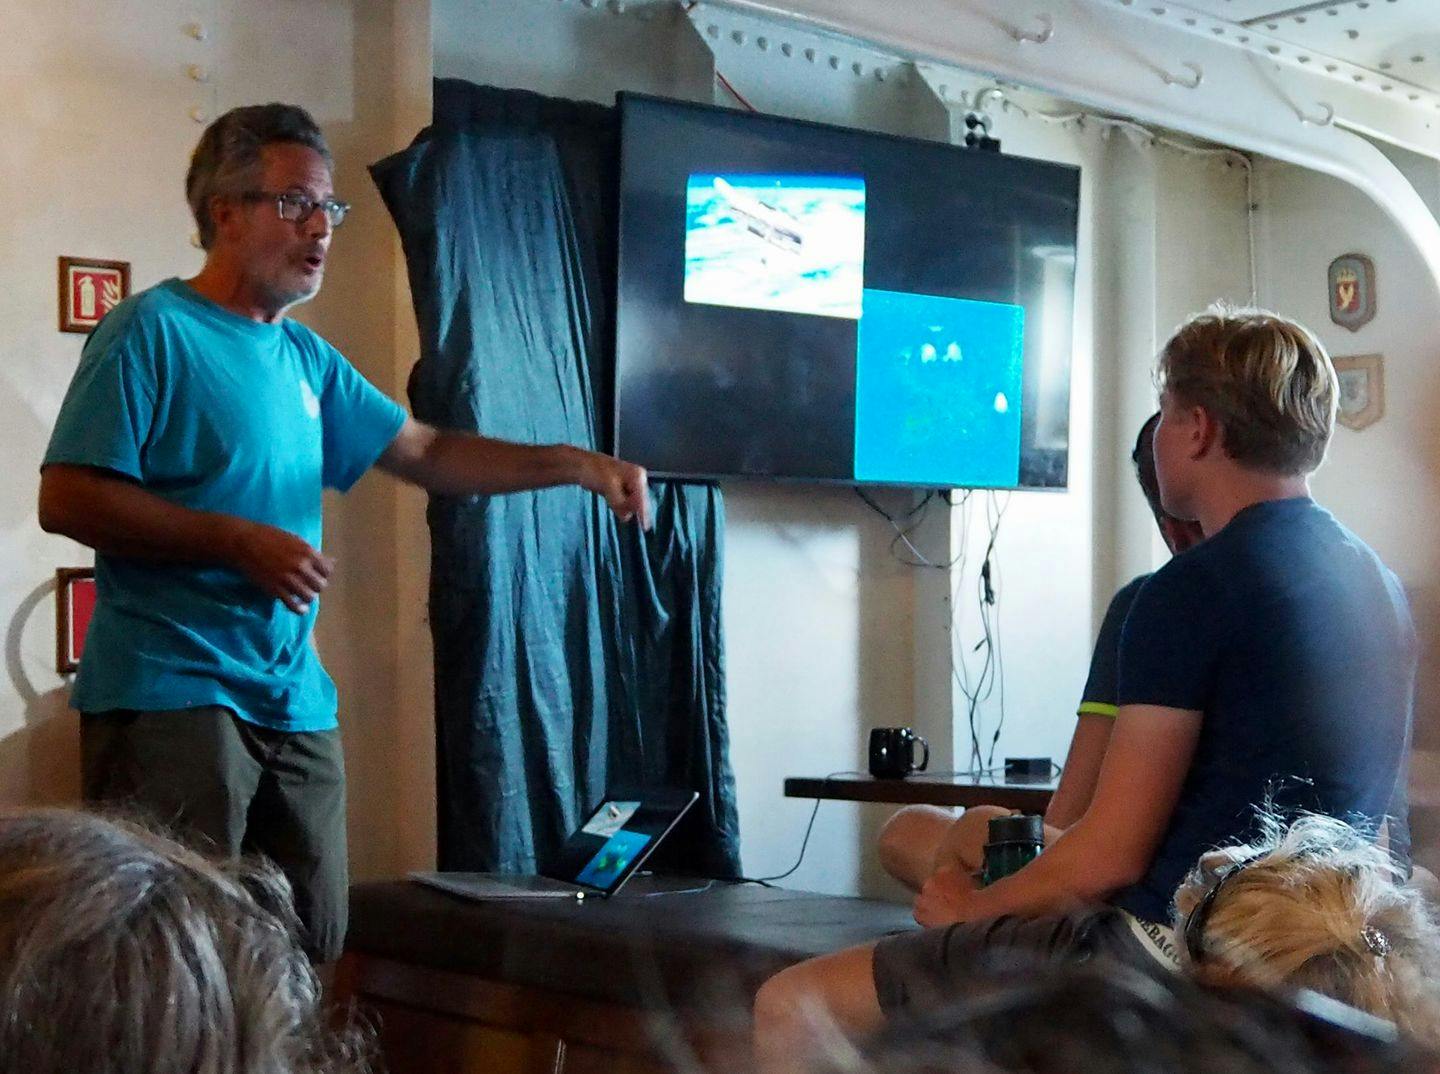 Jason giving a presentation together with Joshua Berger on the future of the ocean. Photo: Dina Storvik